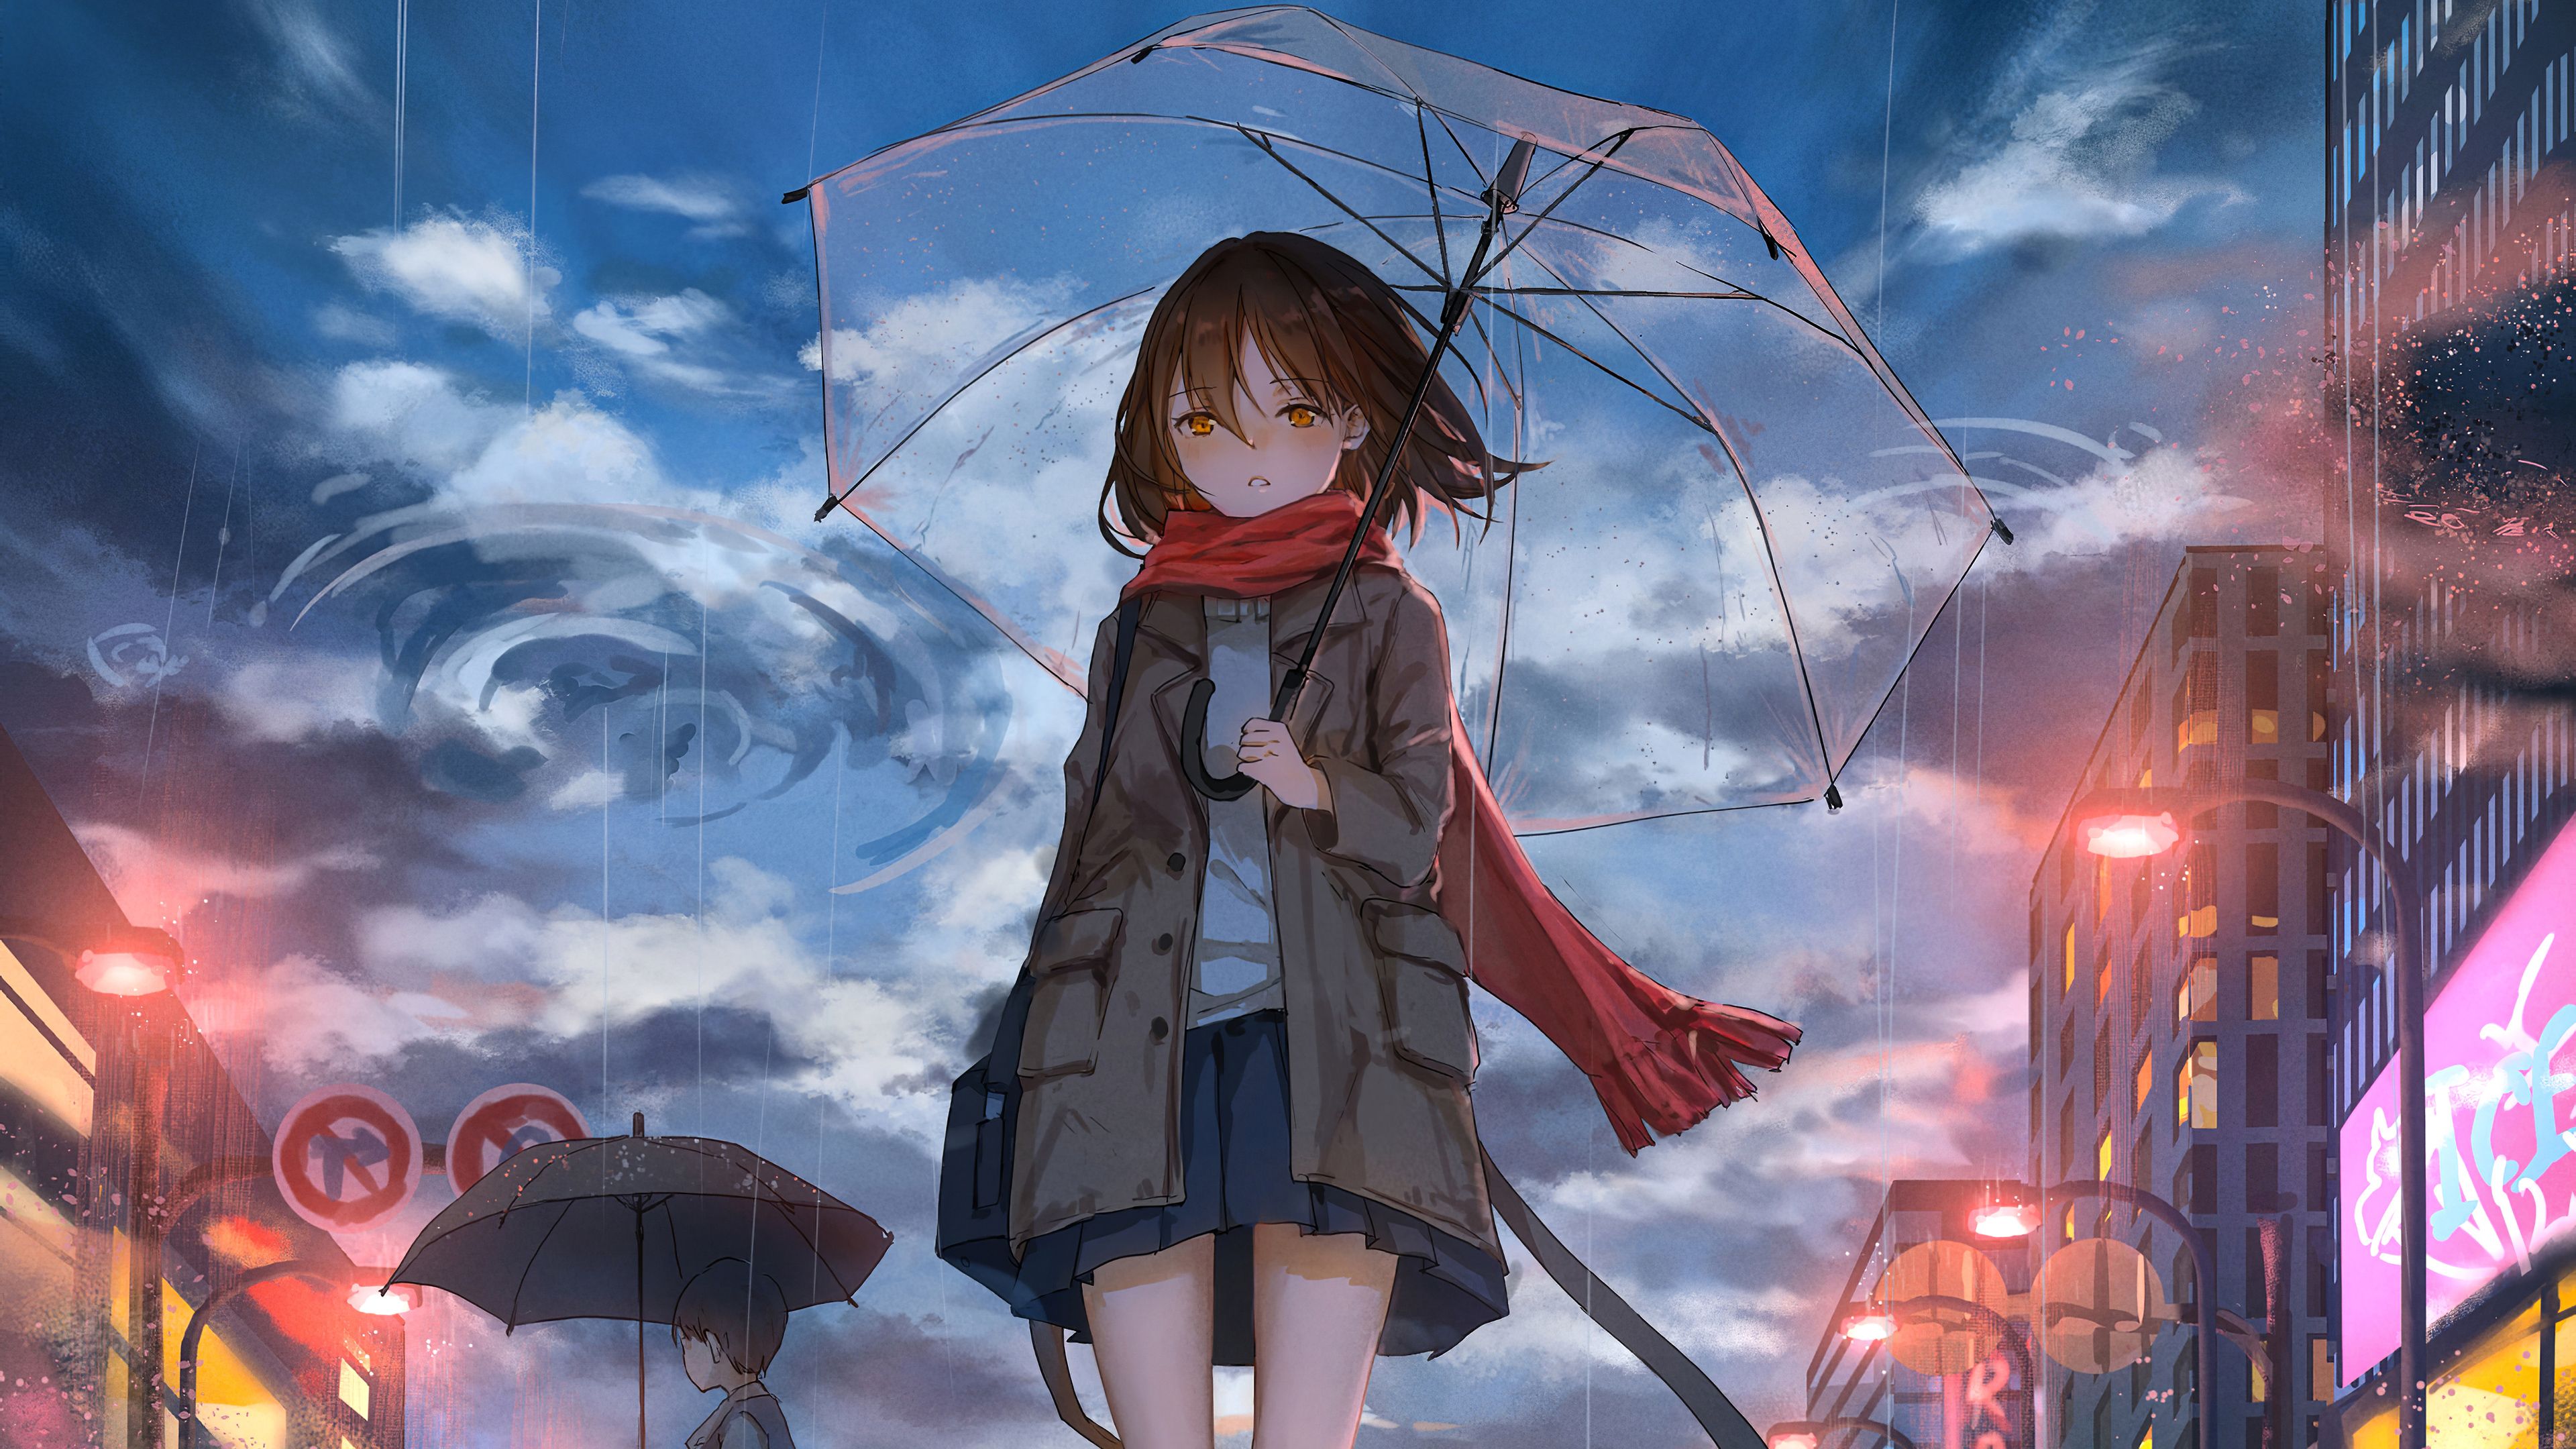 Anime Girl Walking In Rain With Umbrella 4k 1440P Resolution HD 4k Wallpaper, Image, Background, Photo and Picture